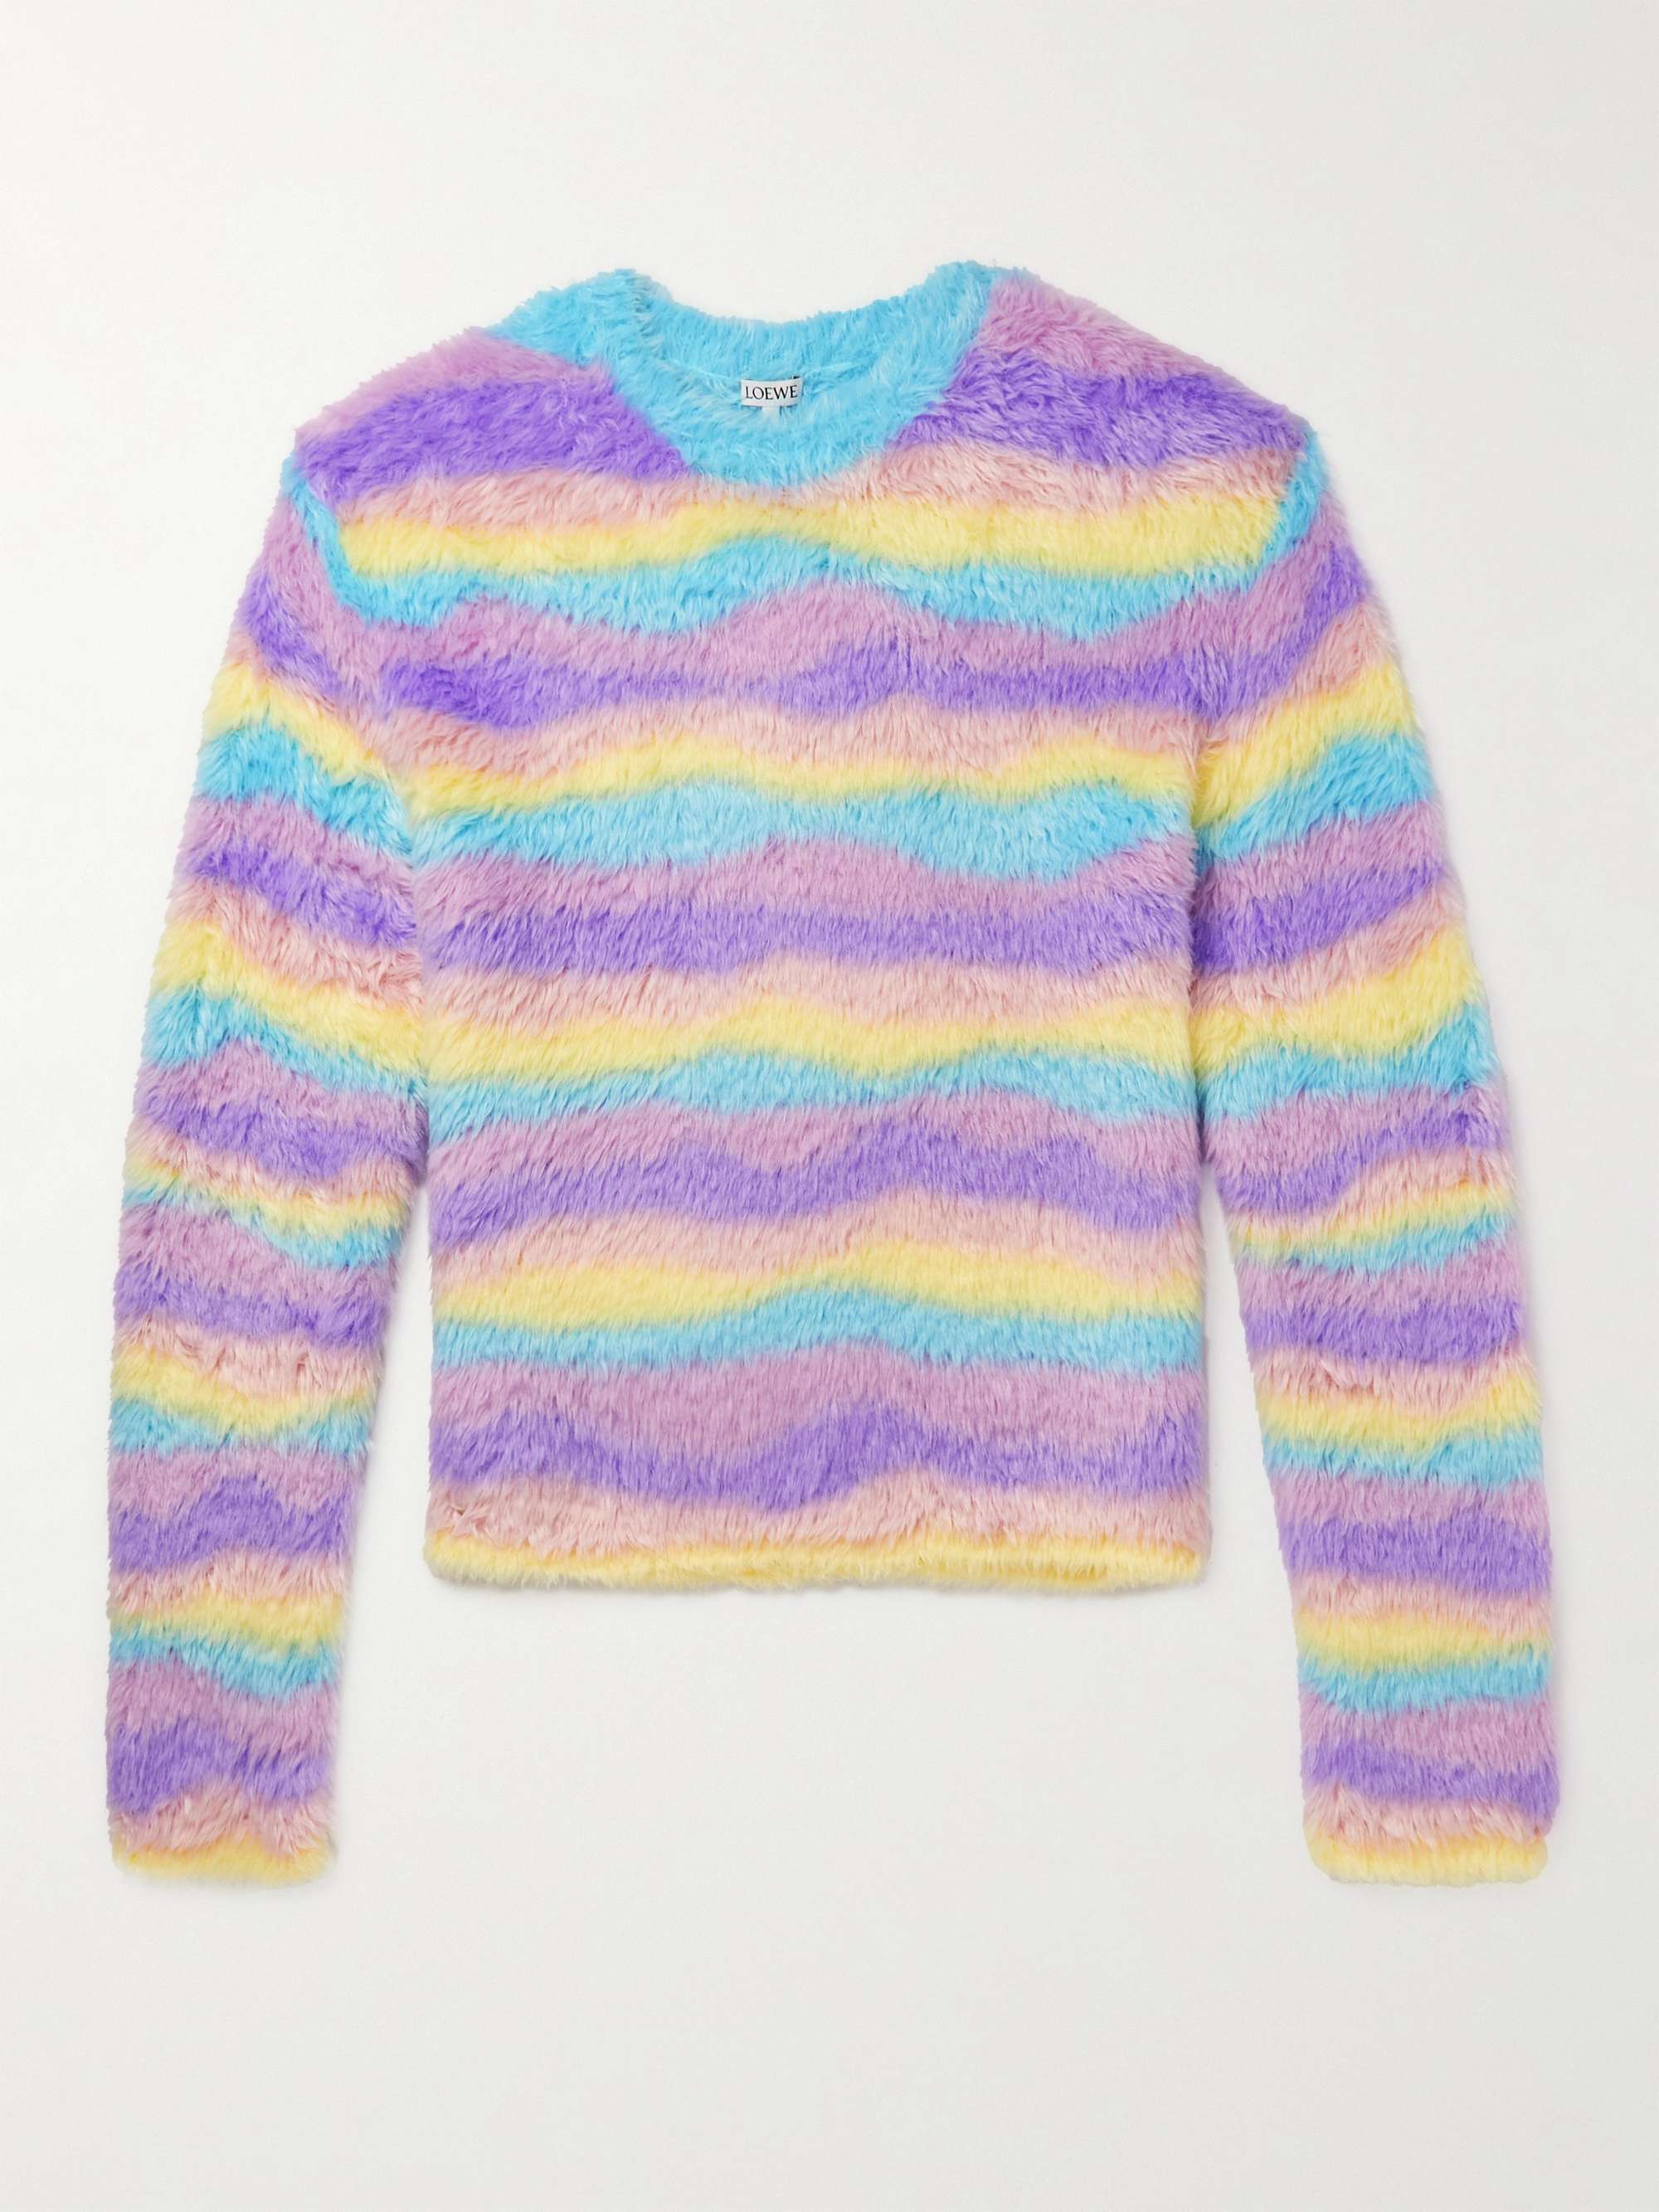 LOEWE Slim-Fit Striped Knitted Sweater